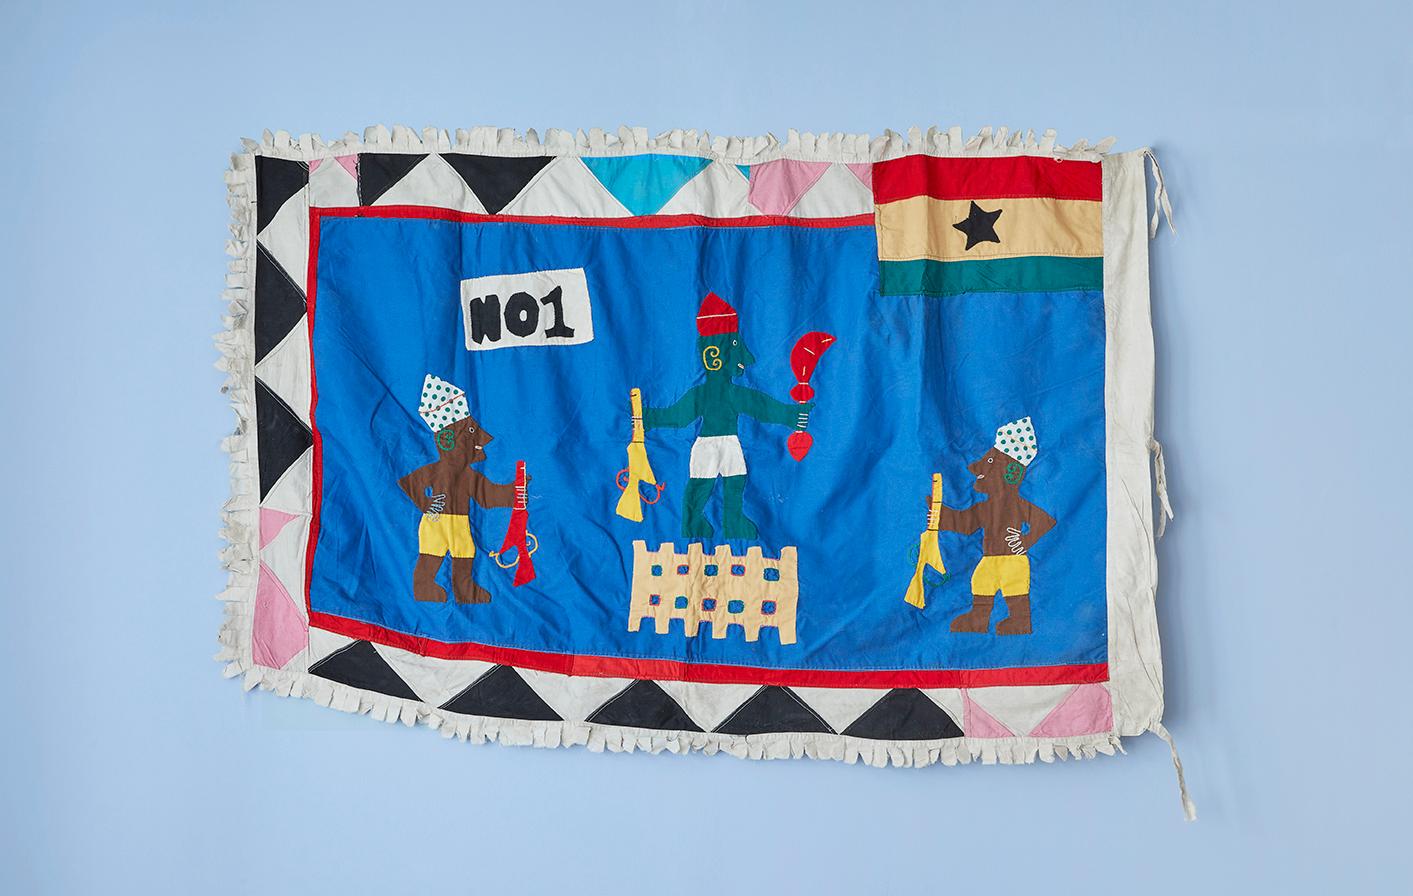 Ghana, 1970's

Asafo flag in cotton applique patterns by maker Kobina Badowah. Fante People.

Asafo Flags are created by the Fante people of Ghana. The flags are visual representations of military organisations in Fante communities known as